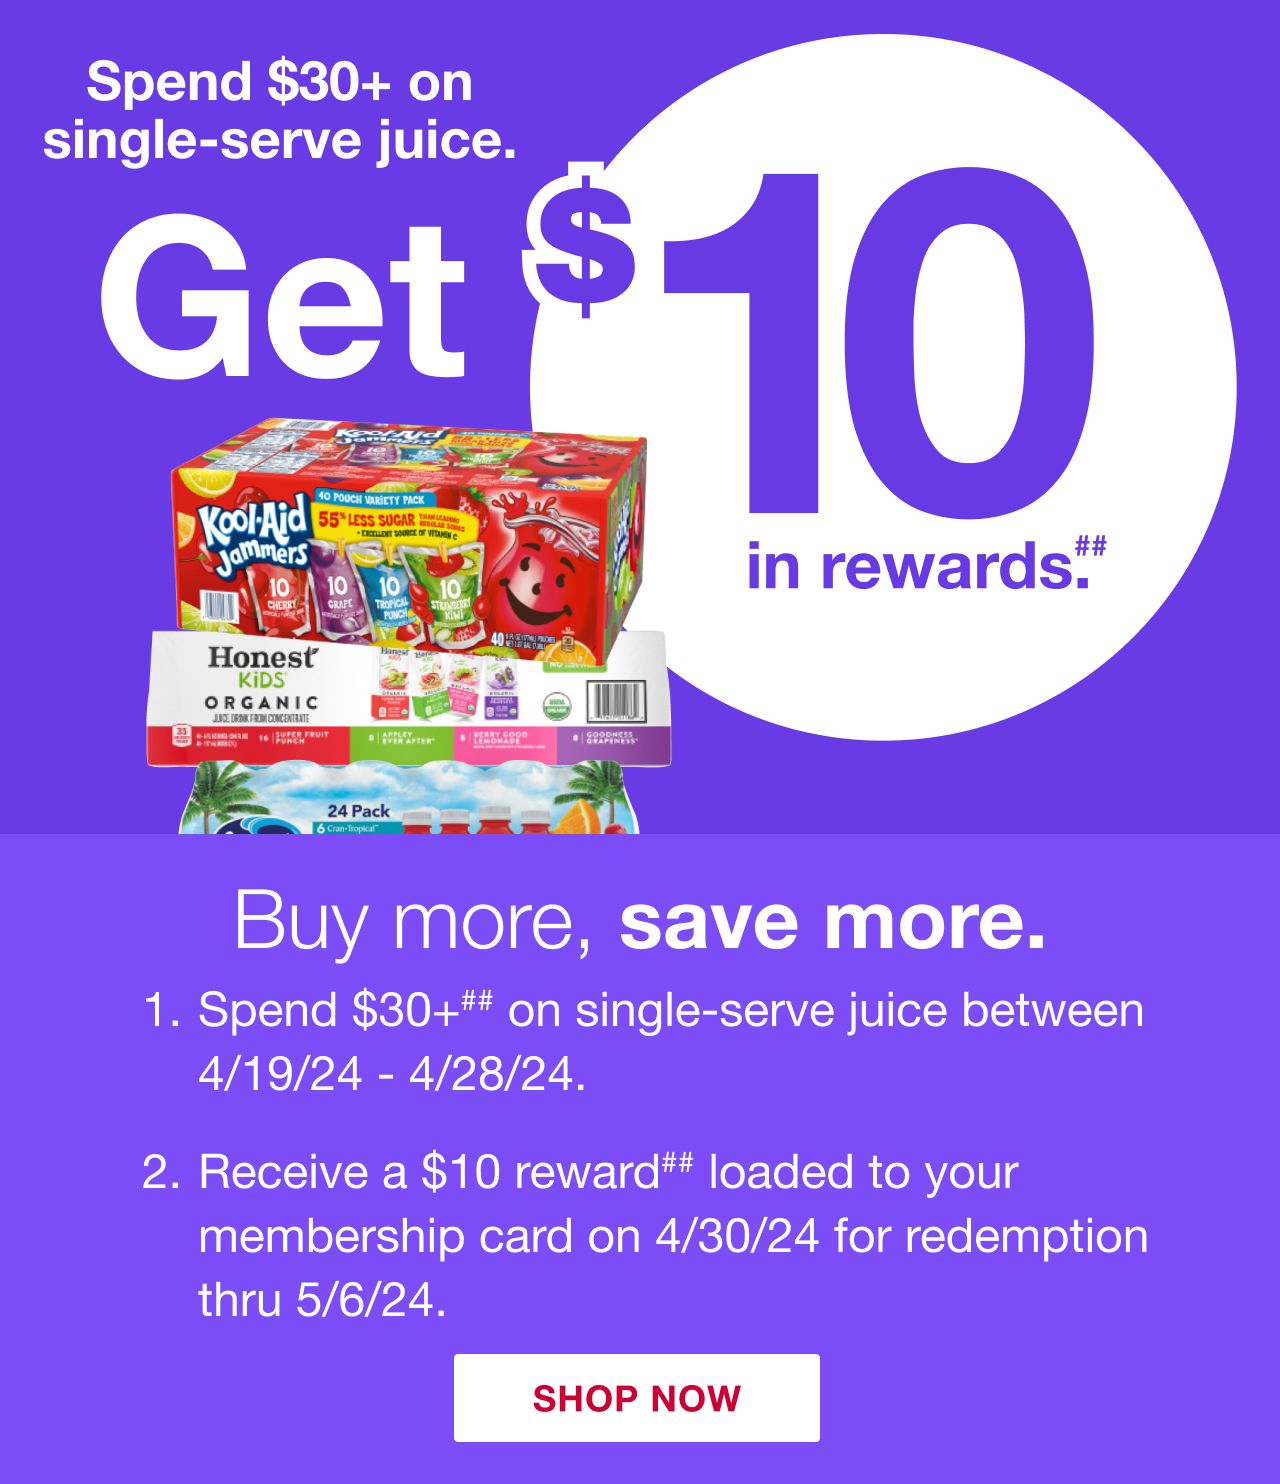 Spend $30 on single-serve juice and get $10 in rewards.## Click to shop now